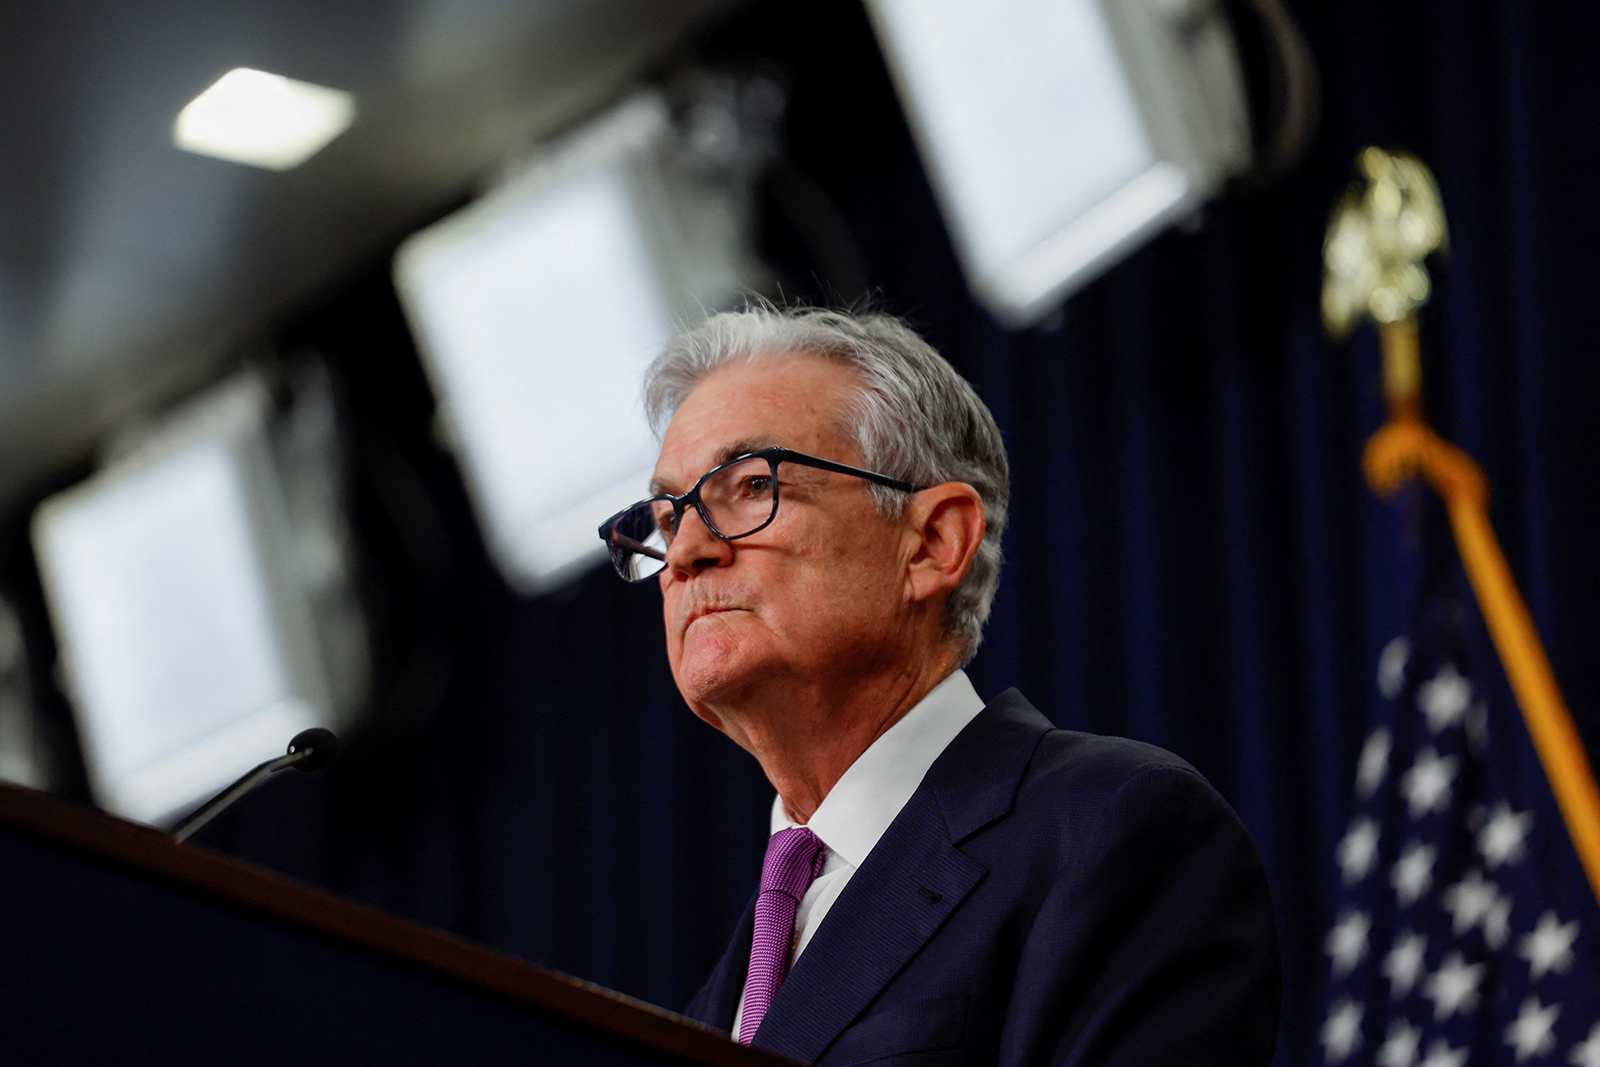 U.S. Federal Reserve Chairman Jerome Powell takes questions from reporters during a press conference after the release of the Fed policy decision to leave interest rates unchanged, at the Federal Reserve in Washington, on September 20.